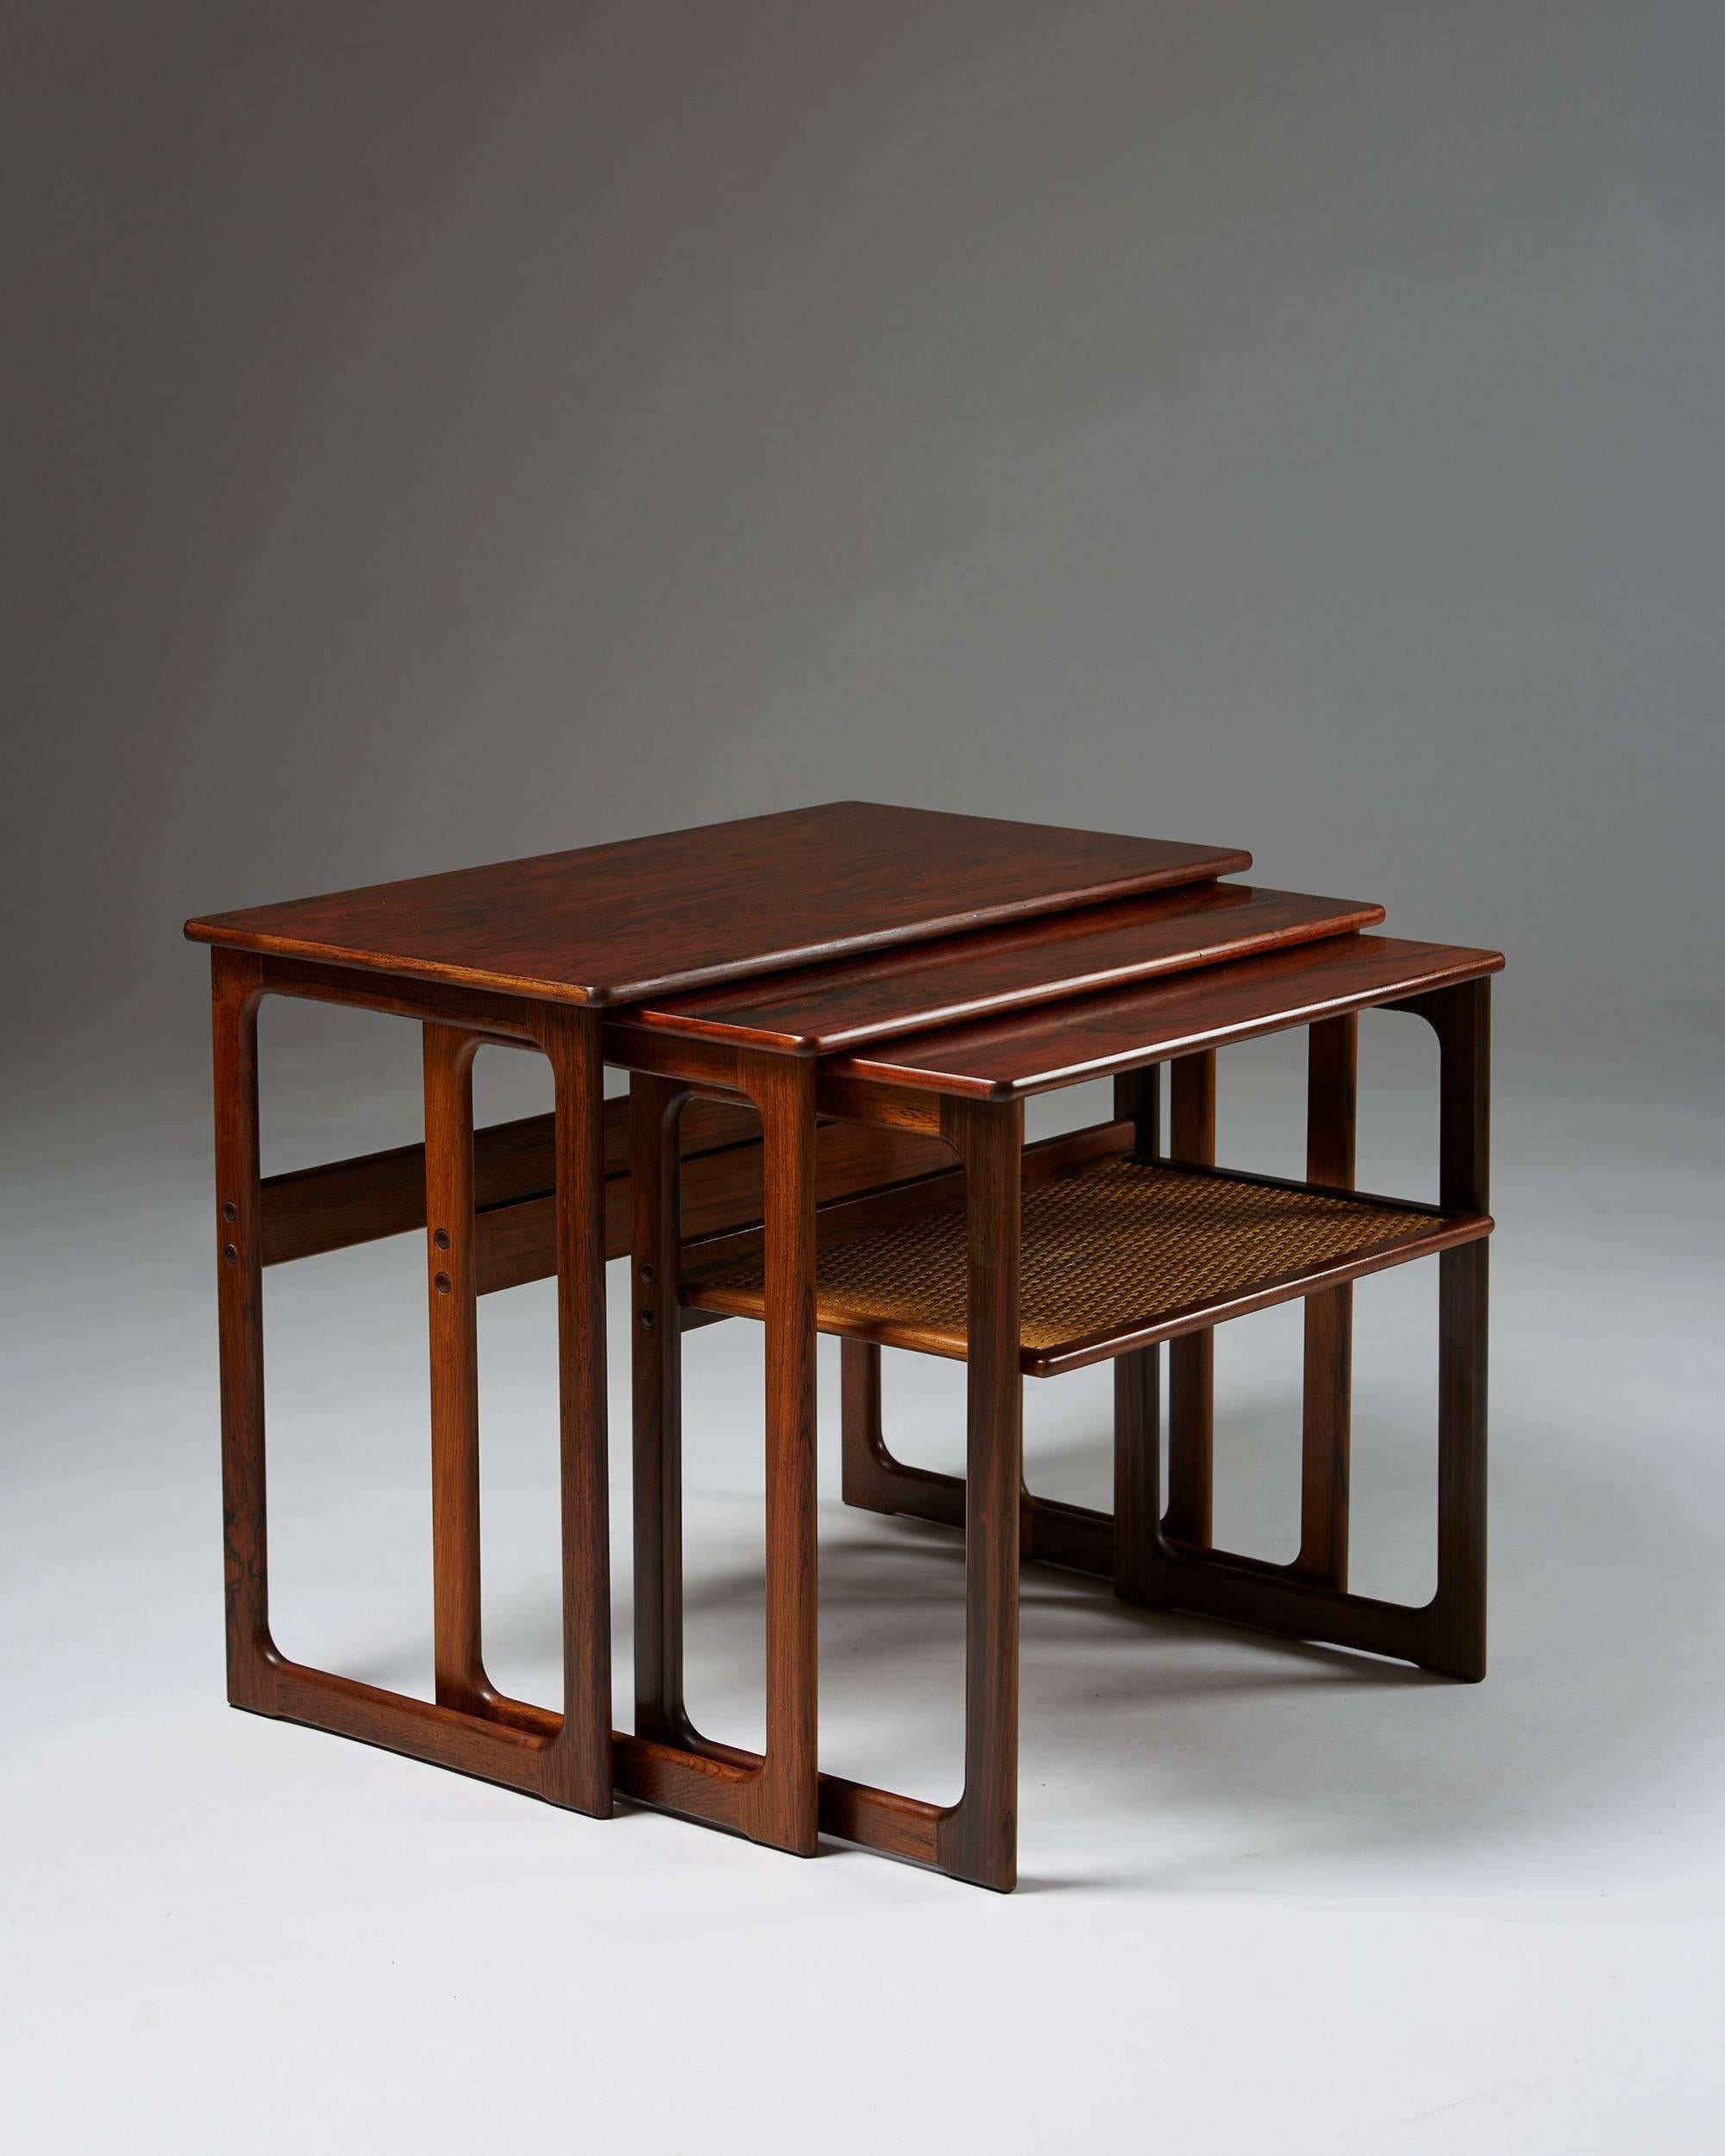 Nest of tables designed by Johannes Andersen for CFC Silkeborg, Denmark, 1960s.
Rosewood and cane.

Measures: H 53 cm/ 20 3/4